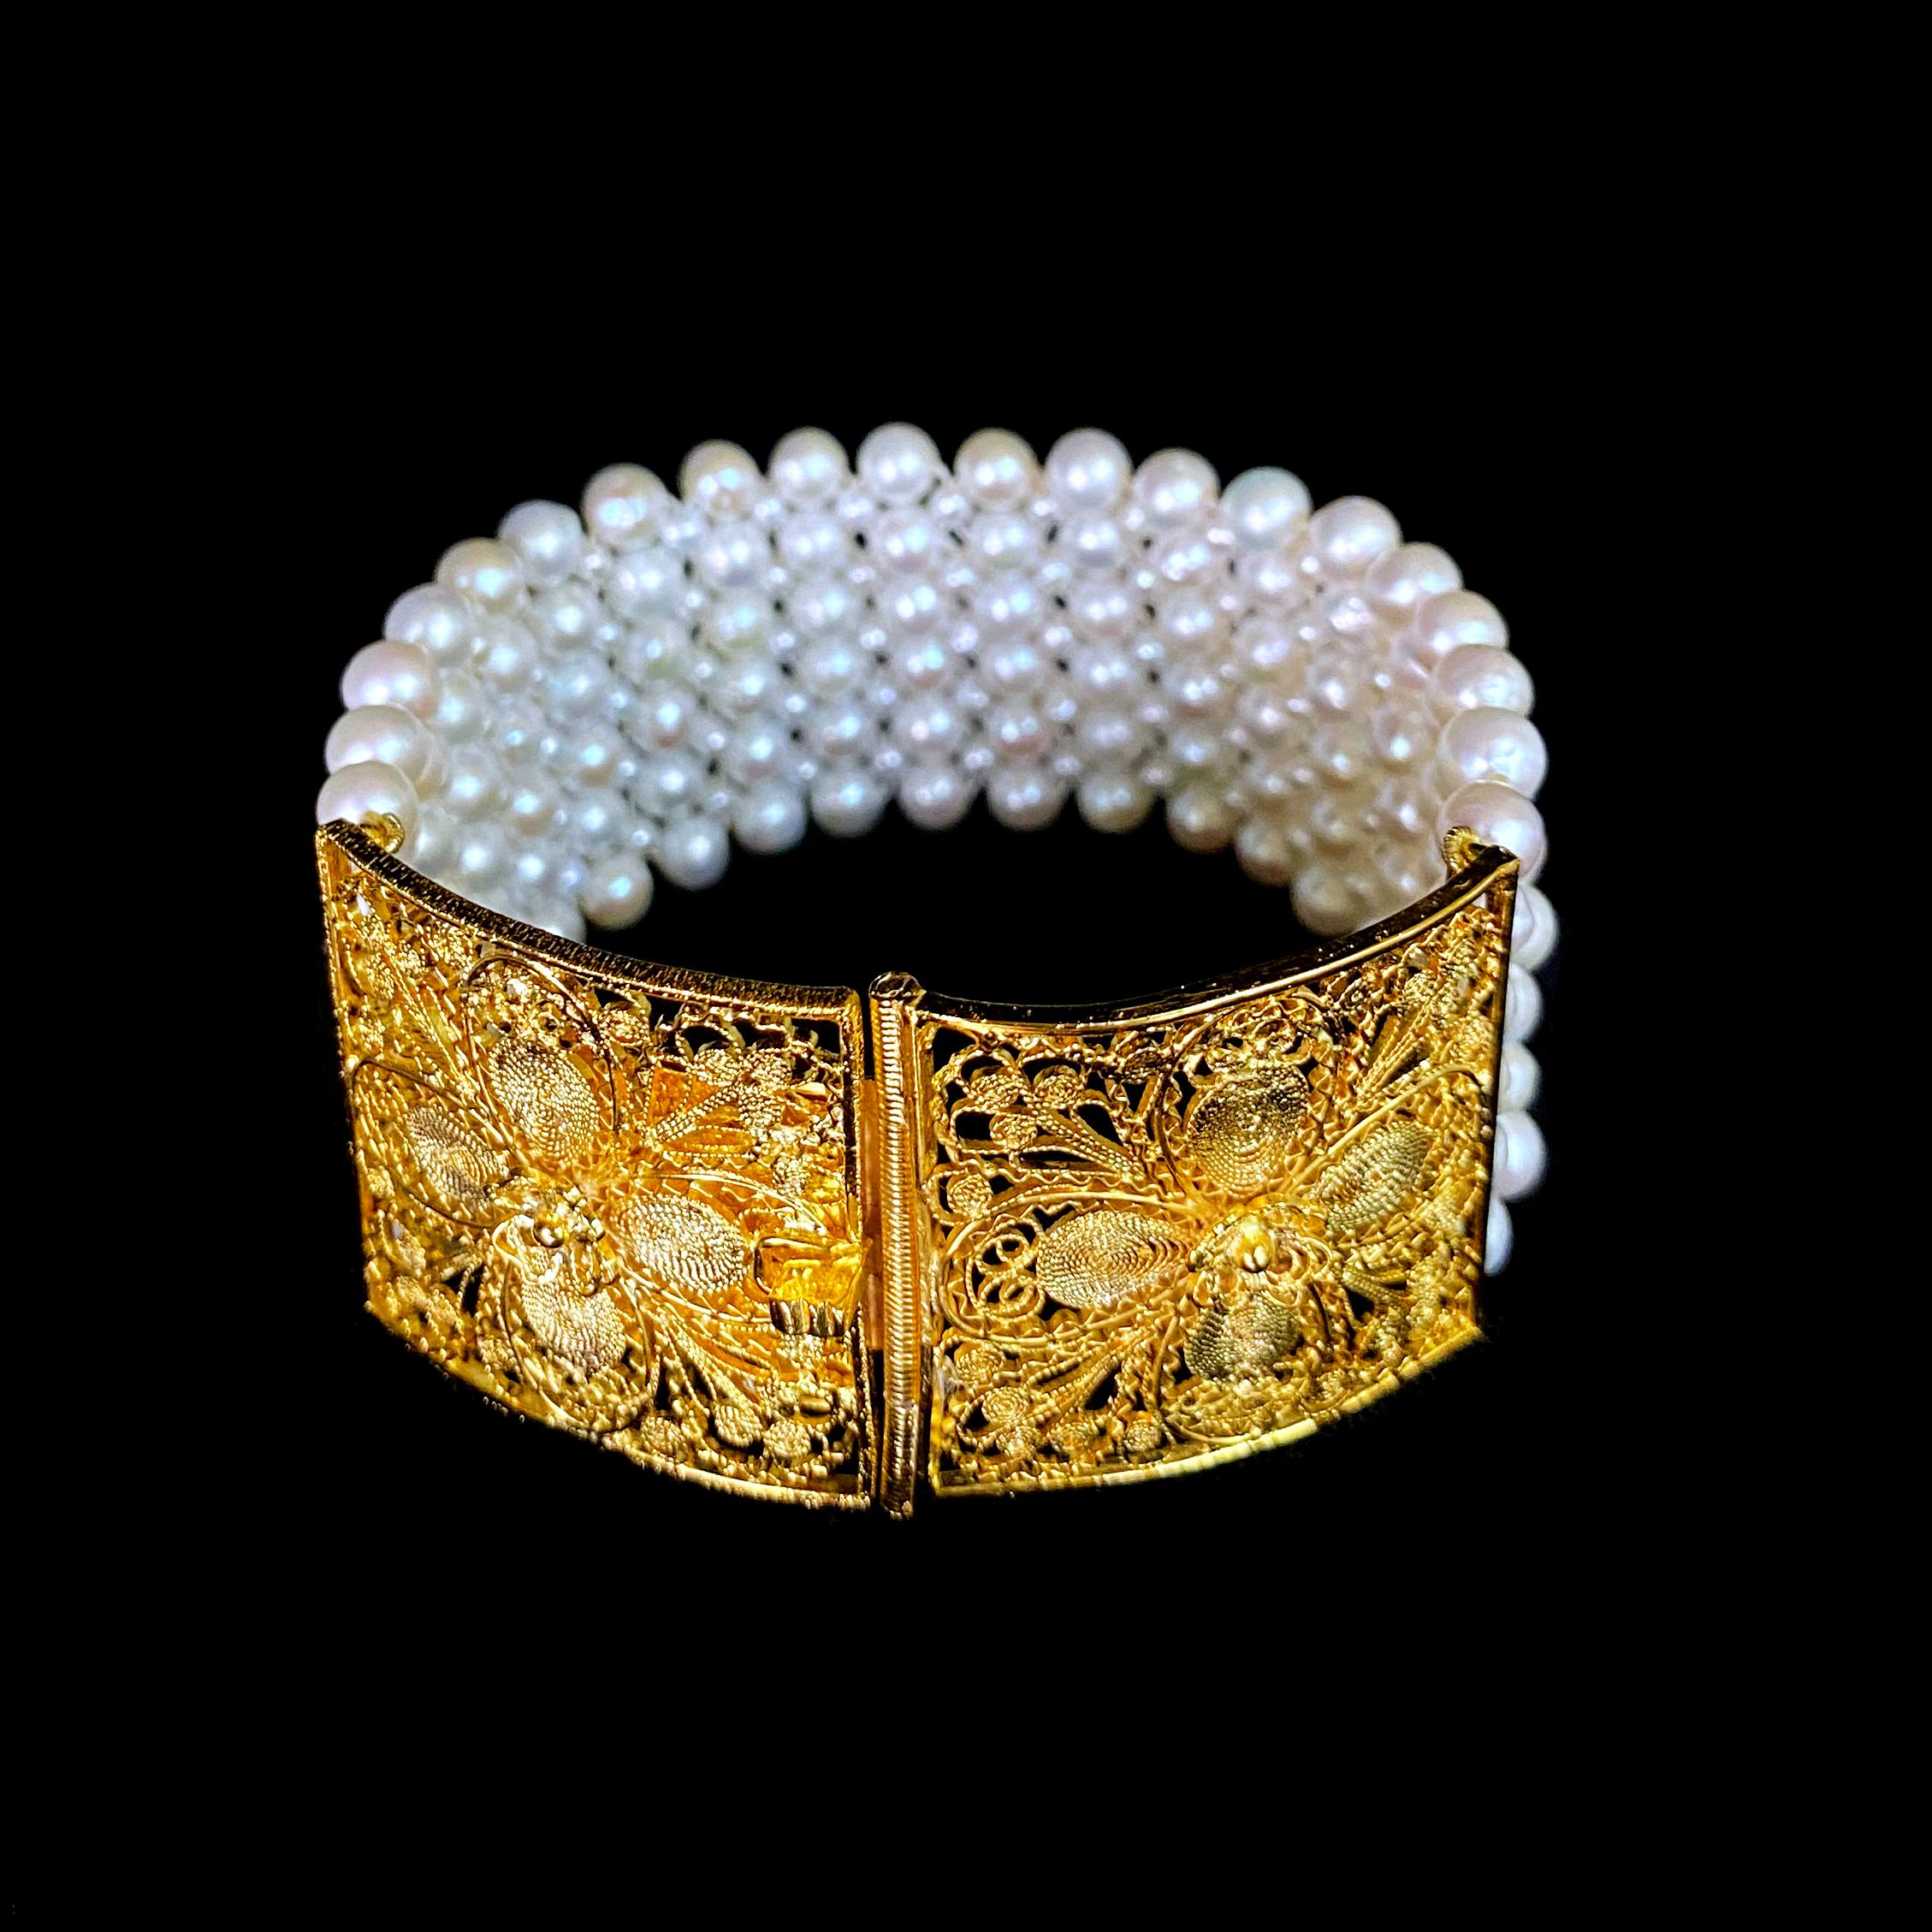 Women's Marina J. Woven Pearl Bracelet with 18k Yellow Gold Plated Floral Clasp 